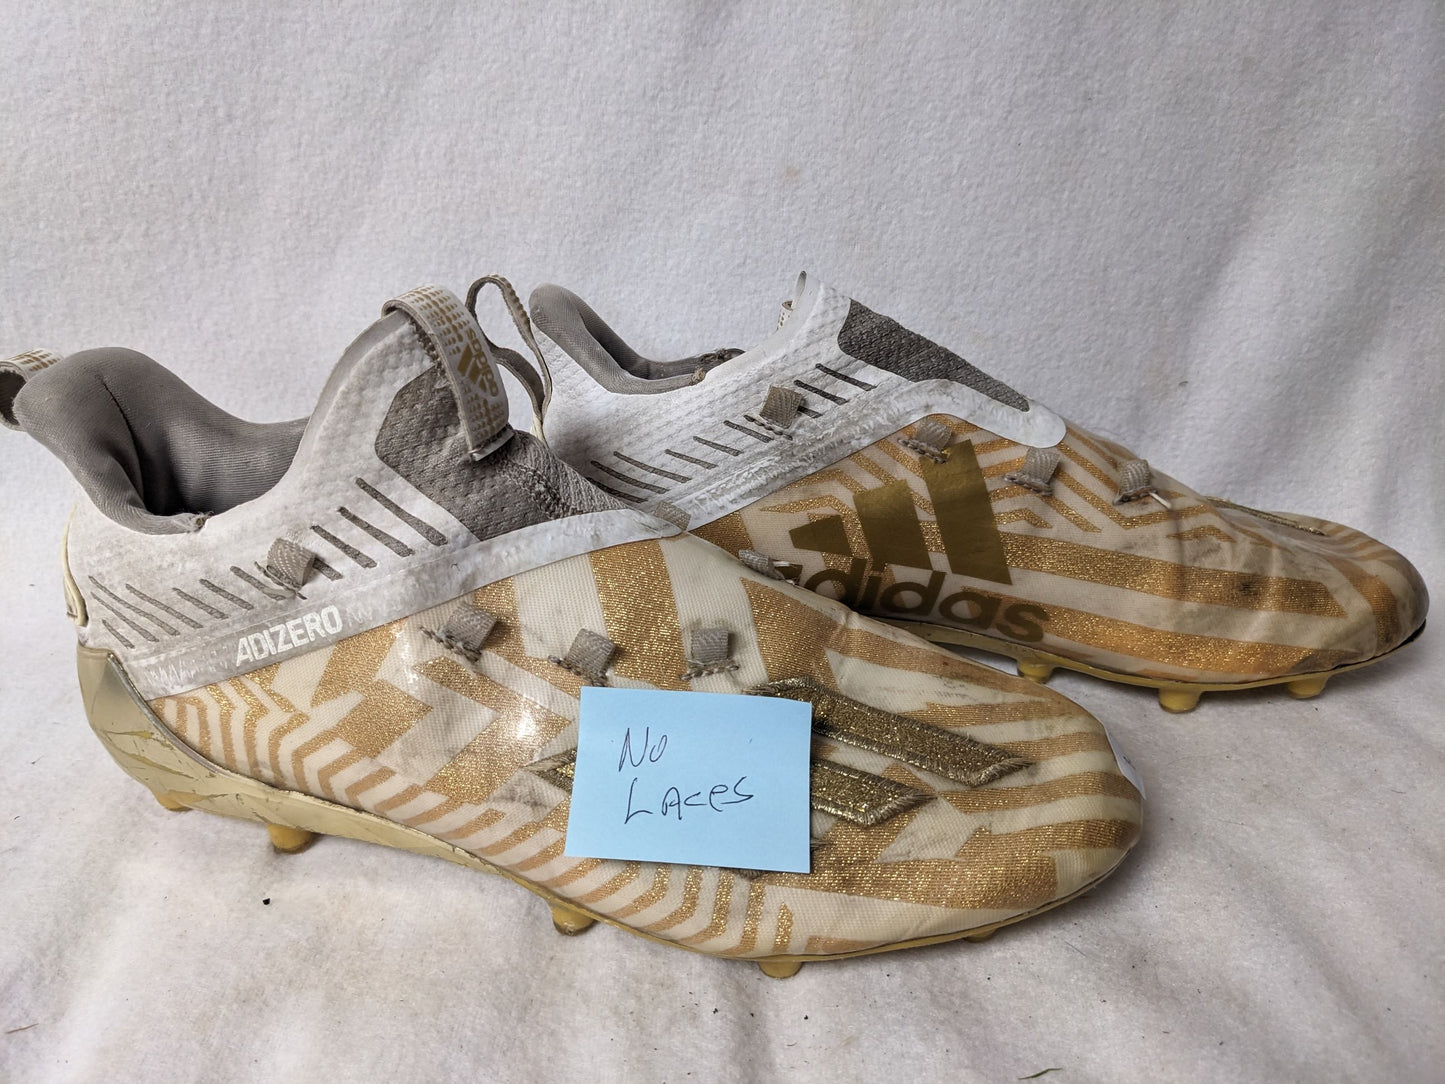 Adidas Adizero Cleats Size 8 Color Yellow Condition Used